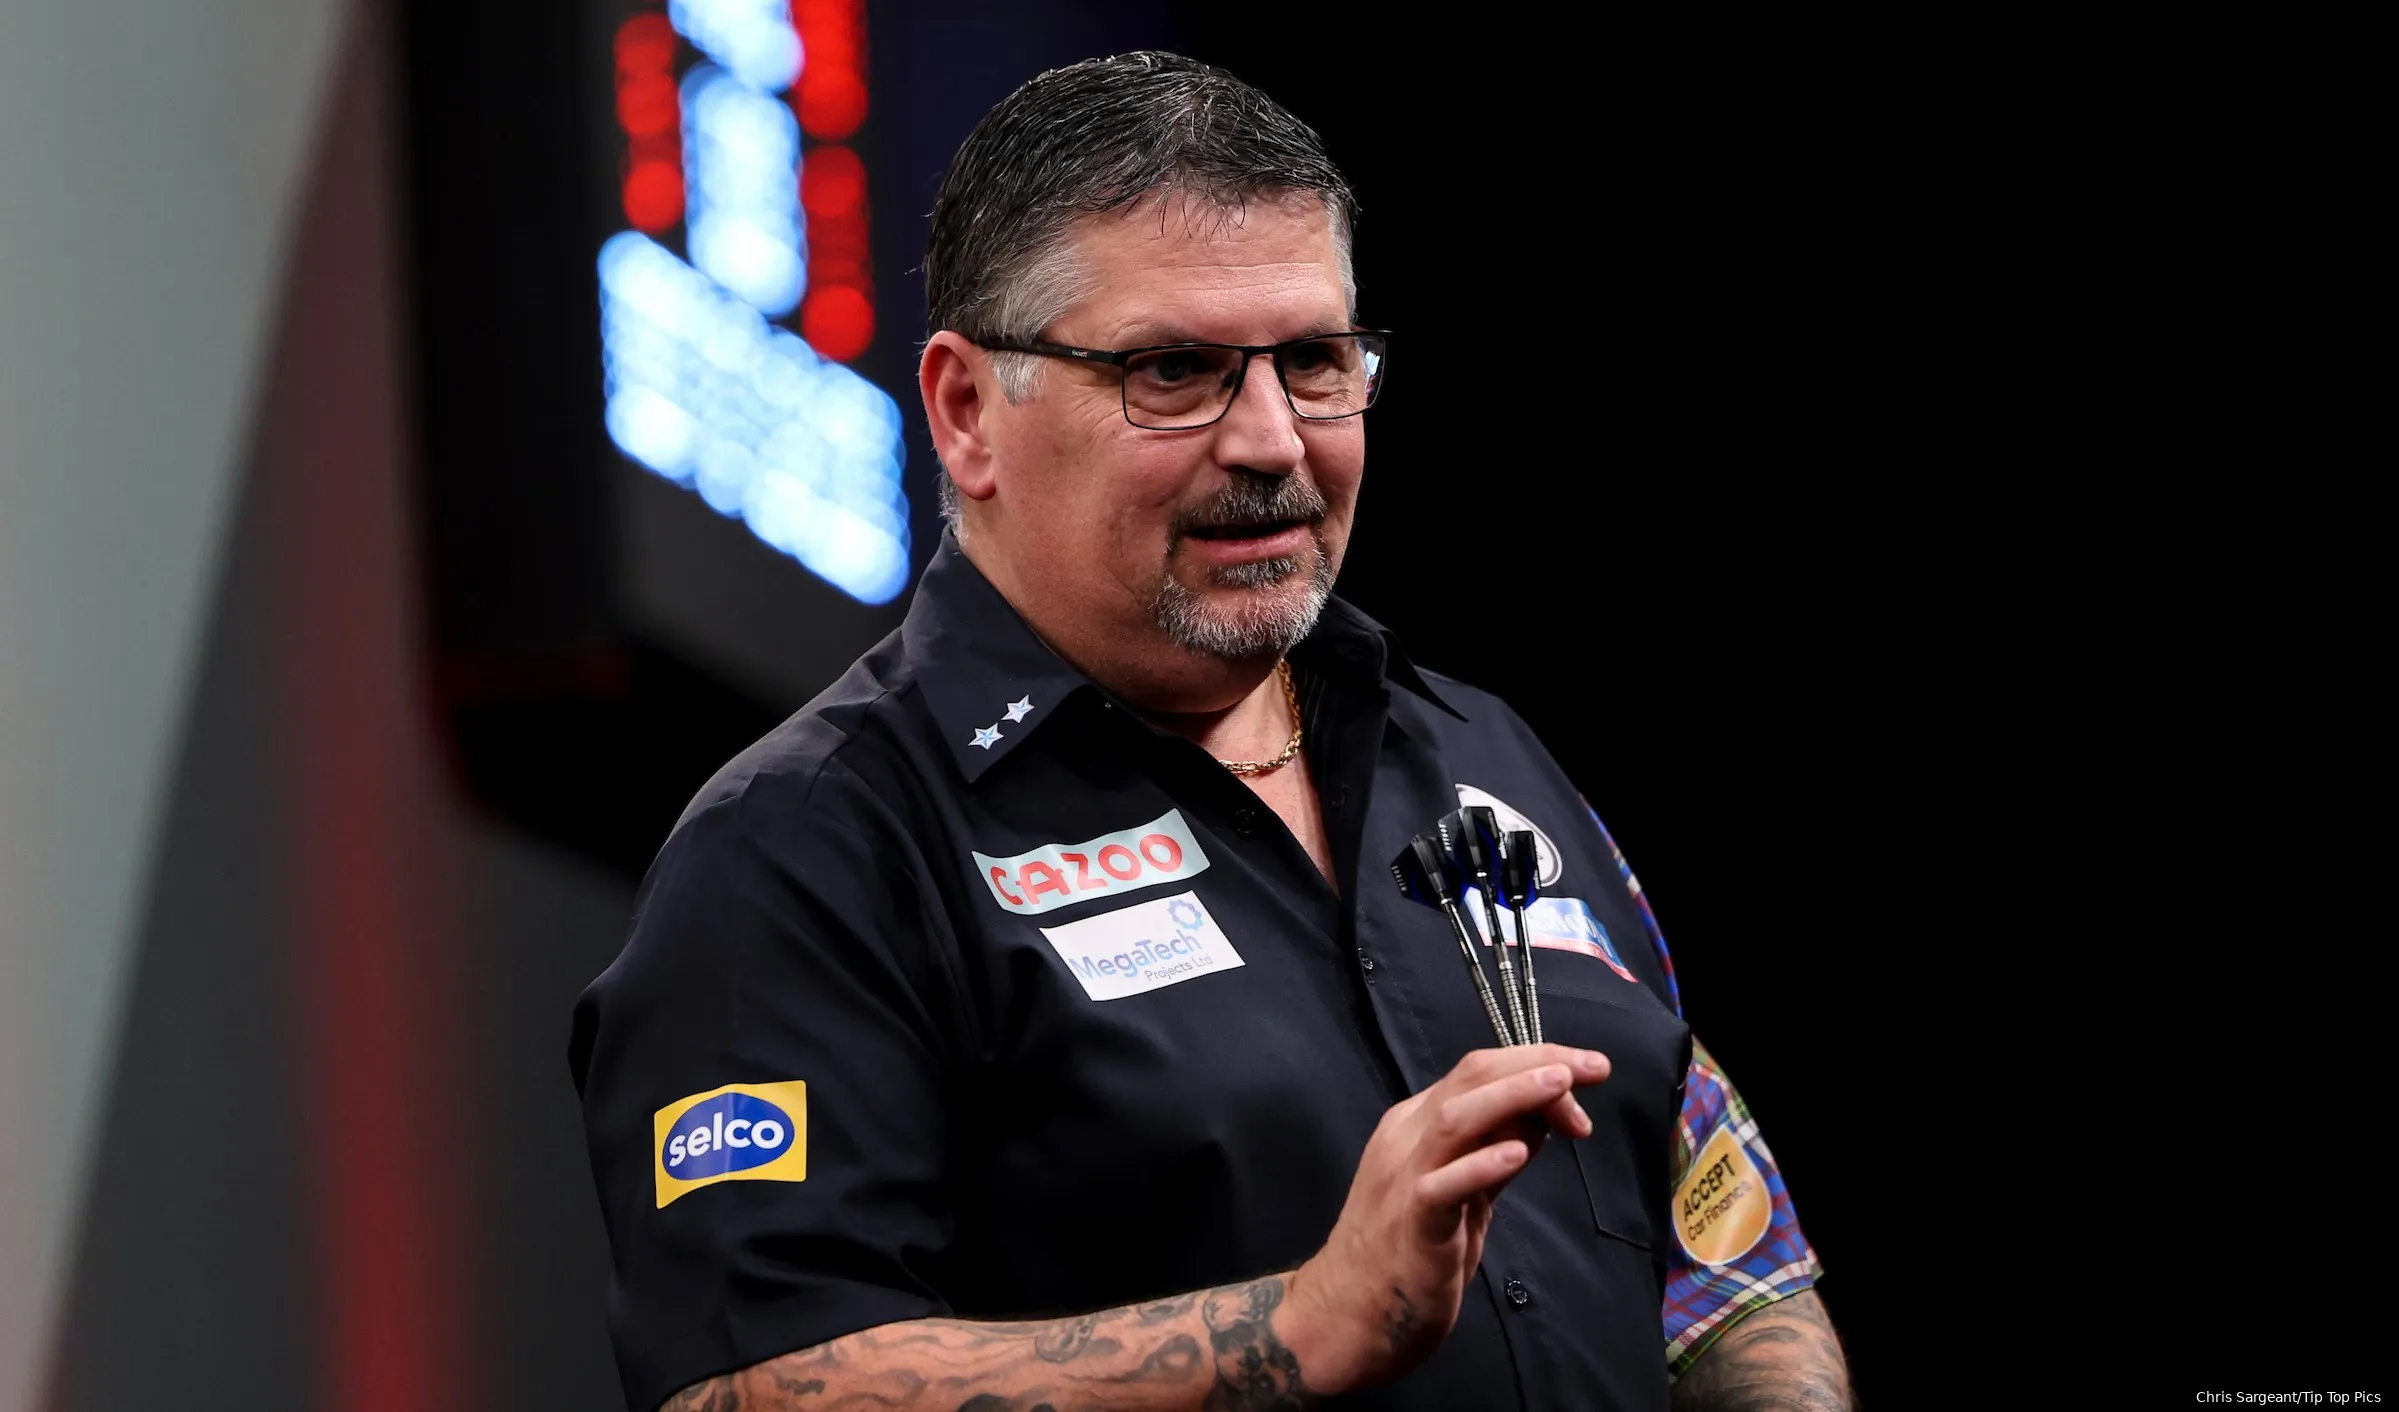 gary anderson cazoo pdc mastrers 2023 0747